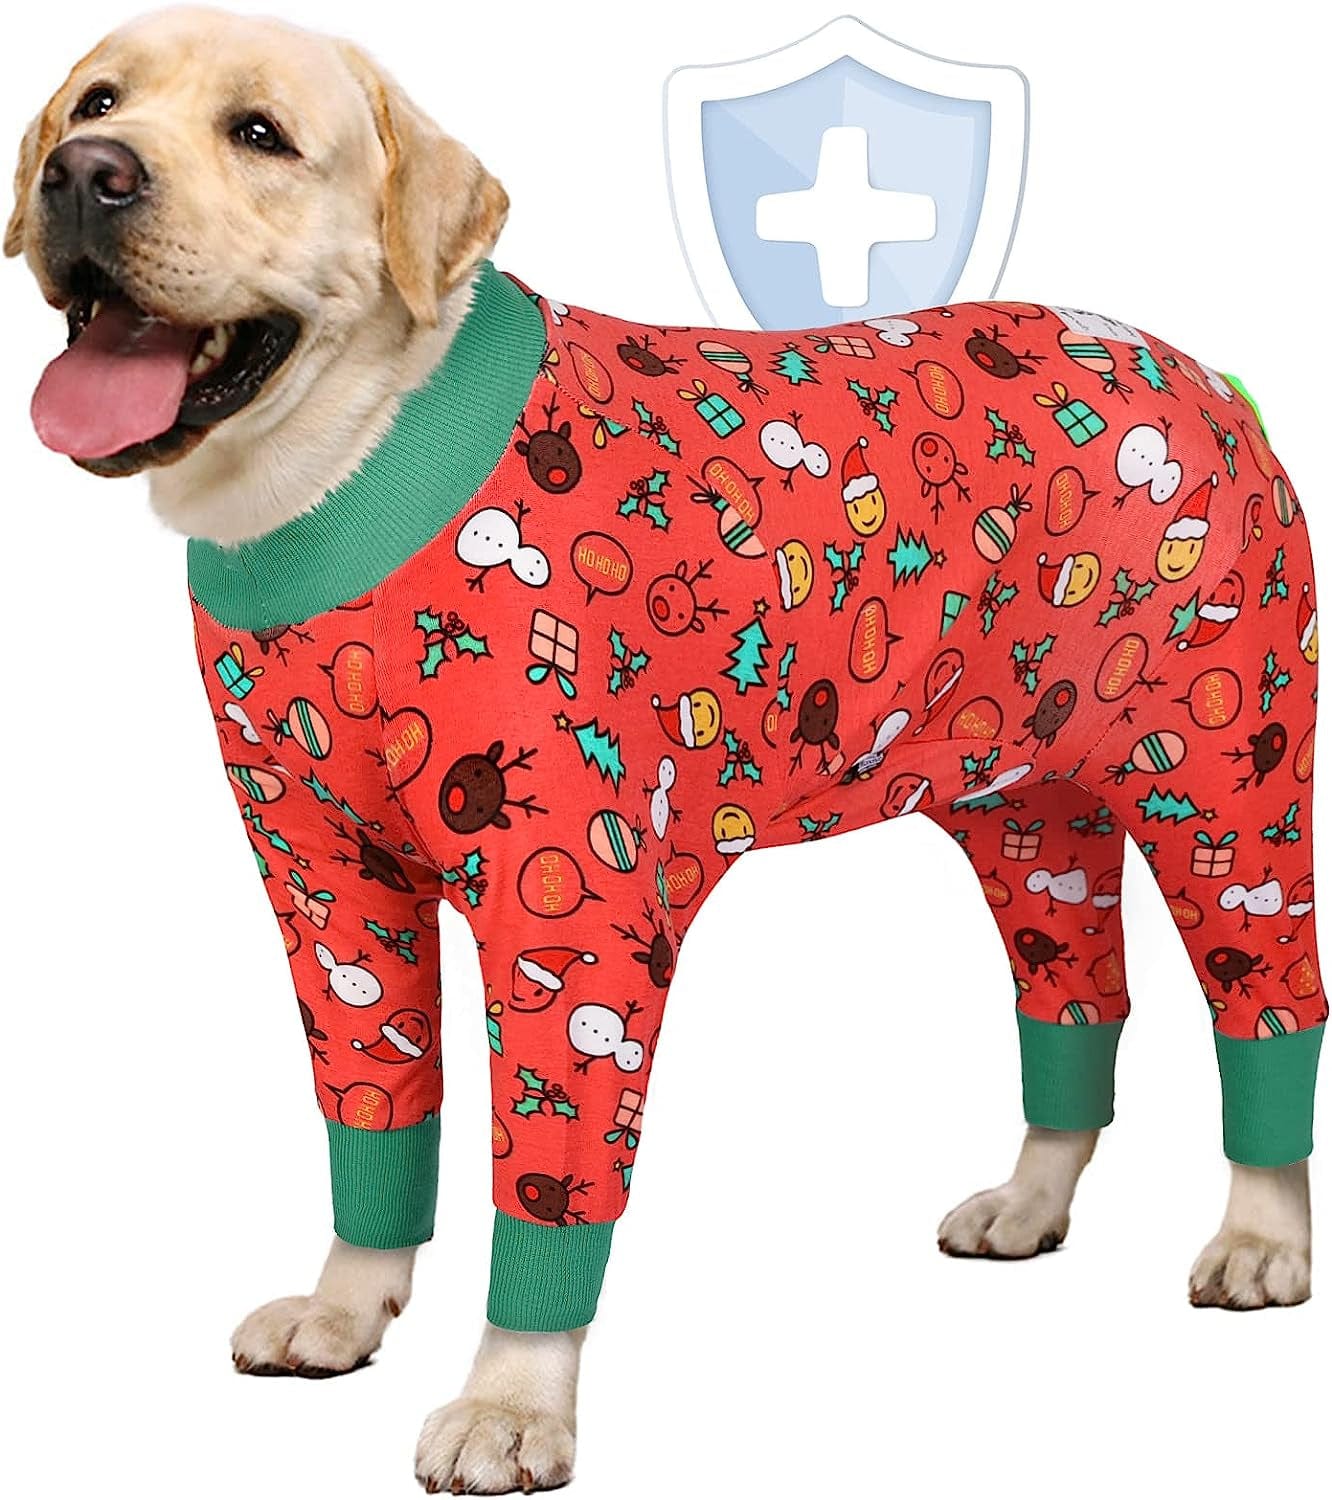 https://kol.pet/cdn/shop/products/aofitee-dog-recovery-suit-after-surgery-dog-onesie-dog-surgical-recovery-shirt-for-abdominal-wounds-dinosaur-dog-pajamas-bodysuit-for-medium-large-dog-cone-alternative-full-body-for-s_b55c15b9-e9c9-4257-aefb-583886c8bdfb_1332x.jpg?v=1678861446